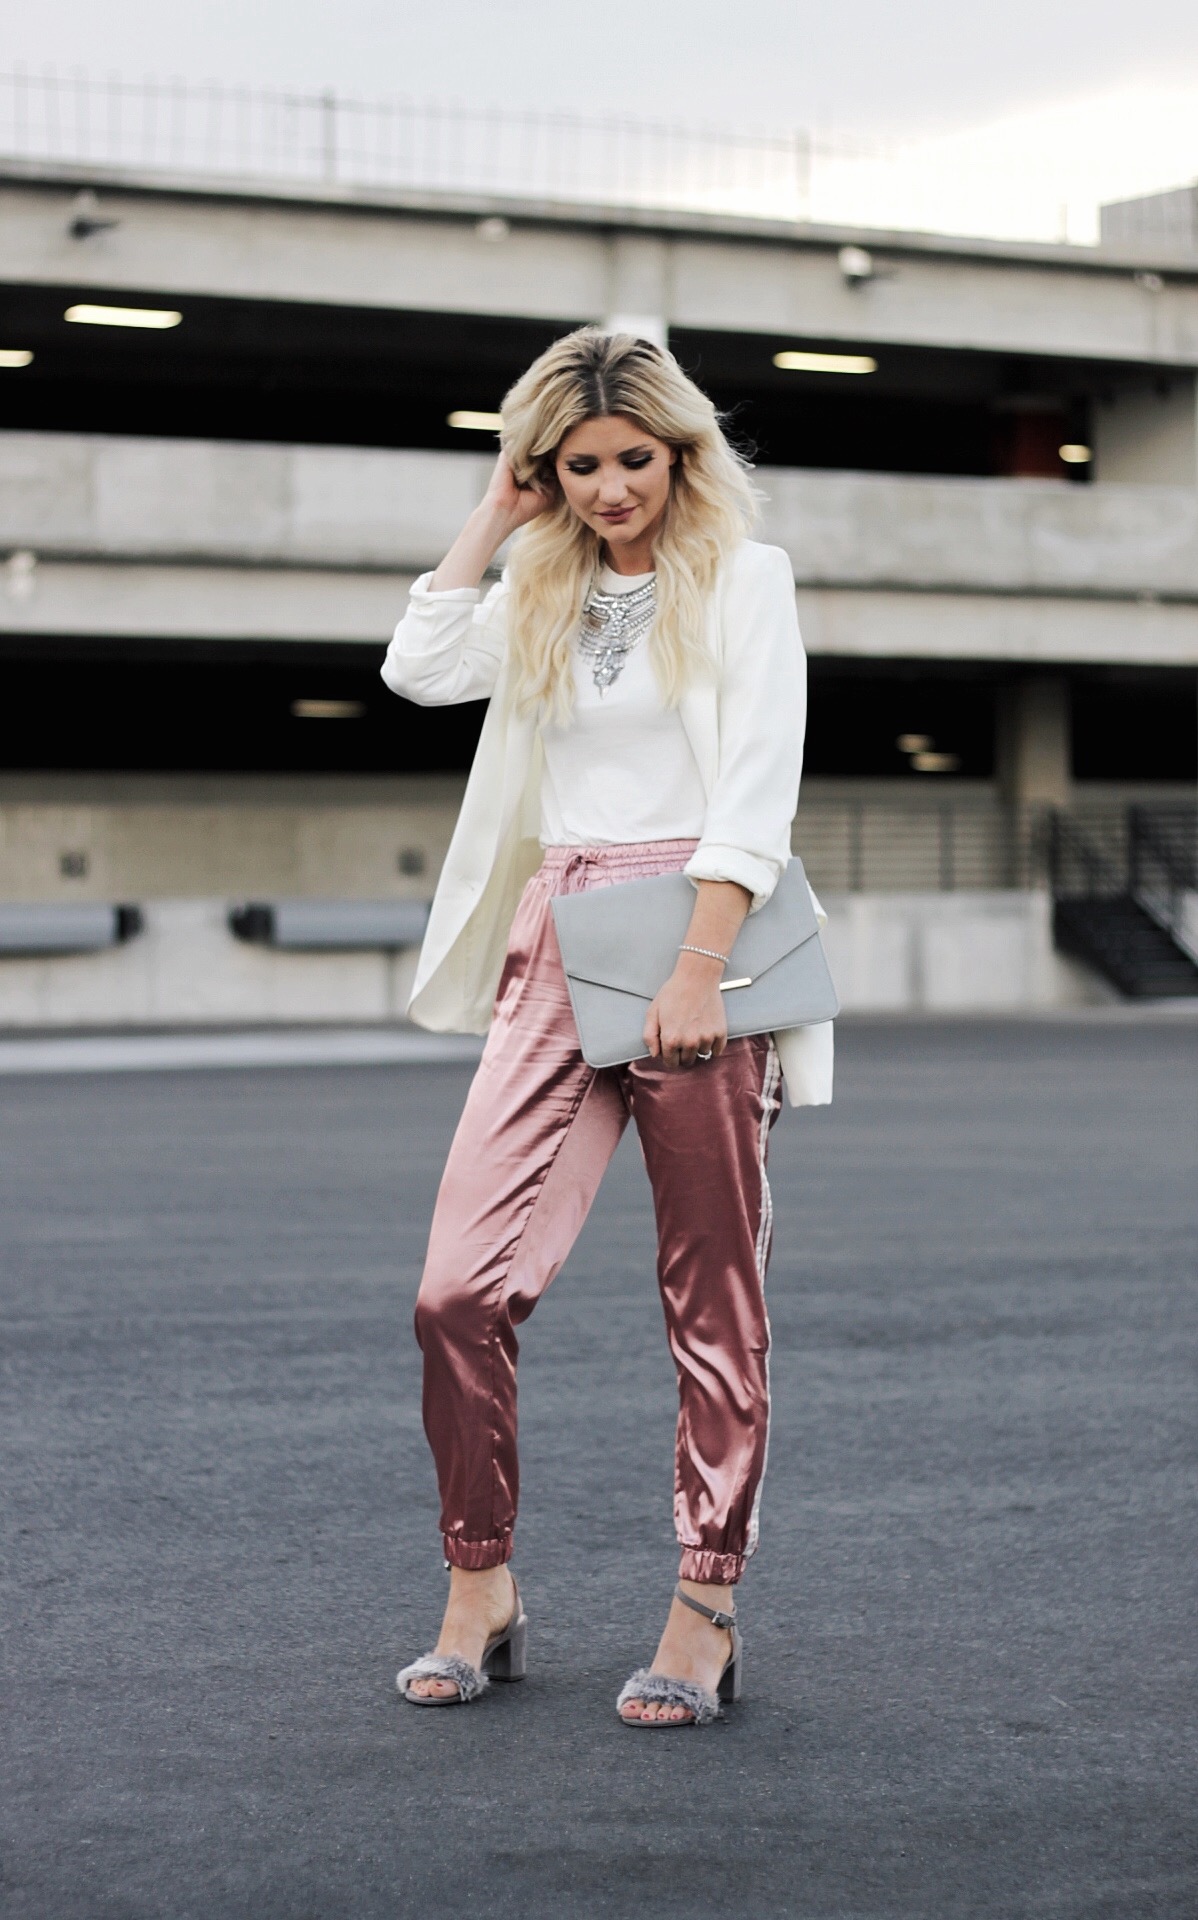 THE TRACK PANTS TREND - The Nomis Niche